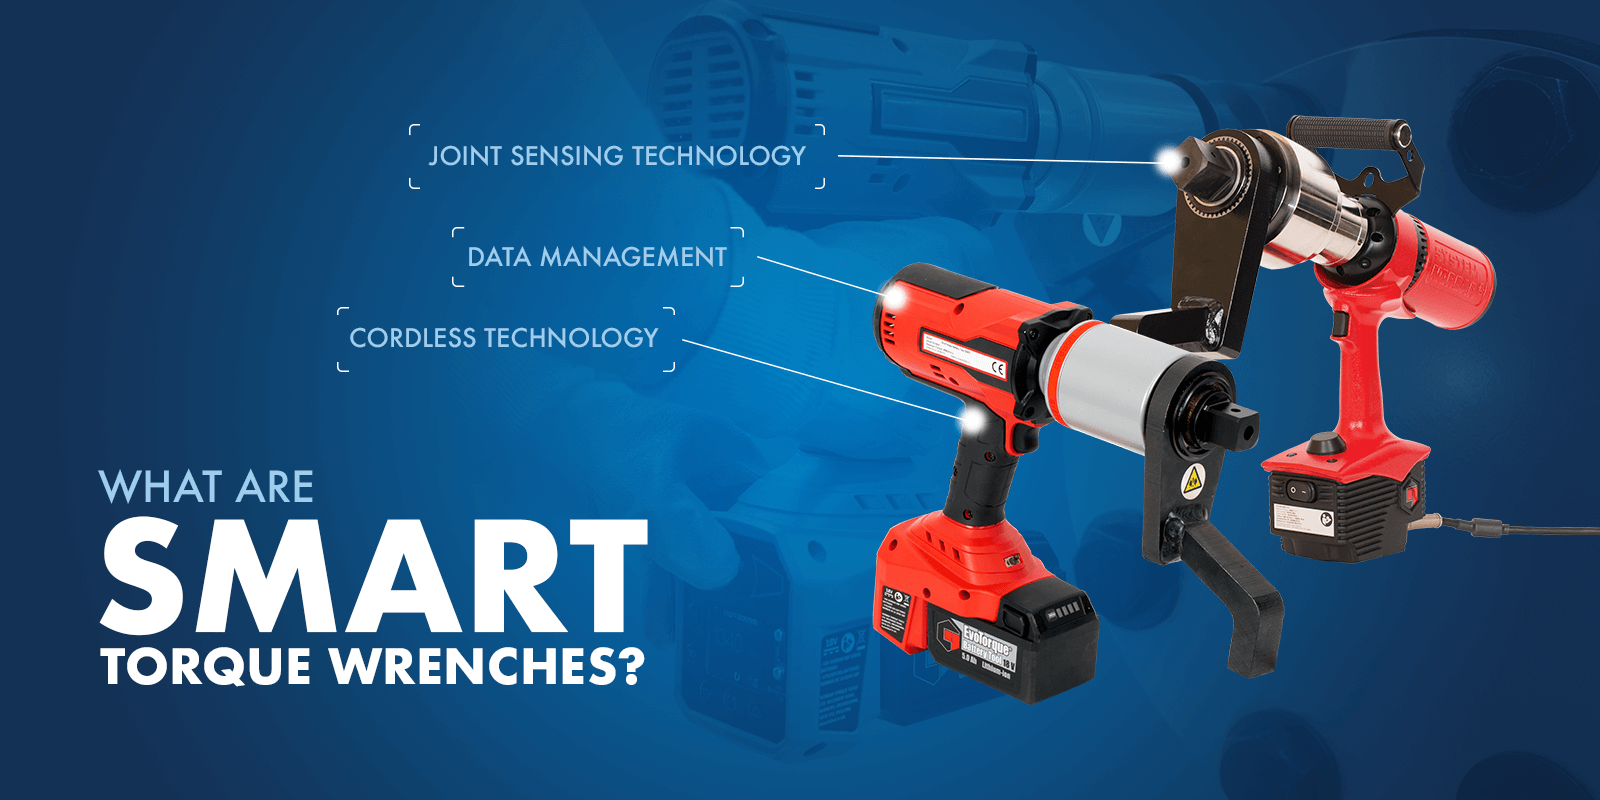 What are Smart Torque Wrenches?